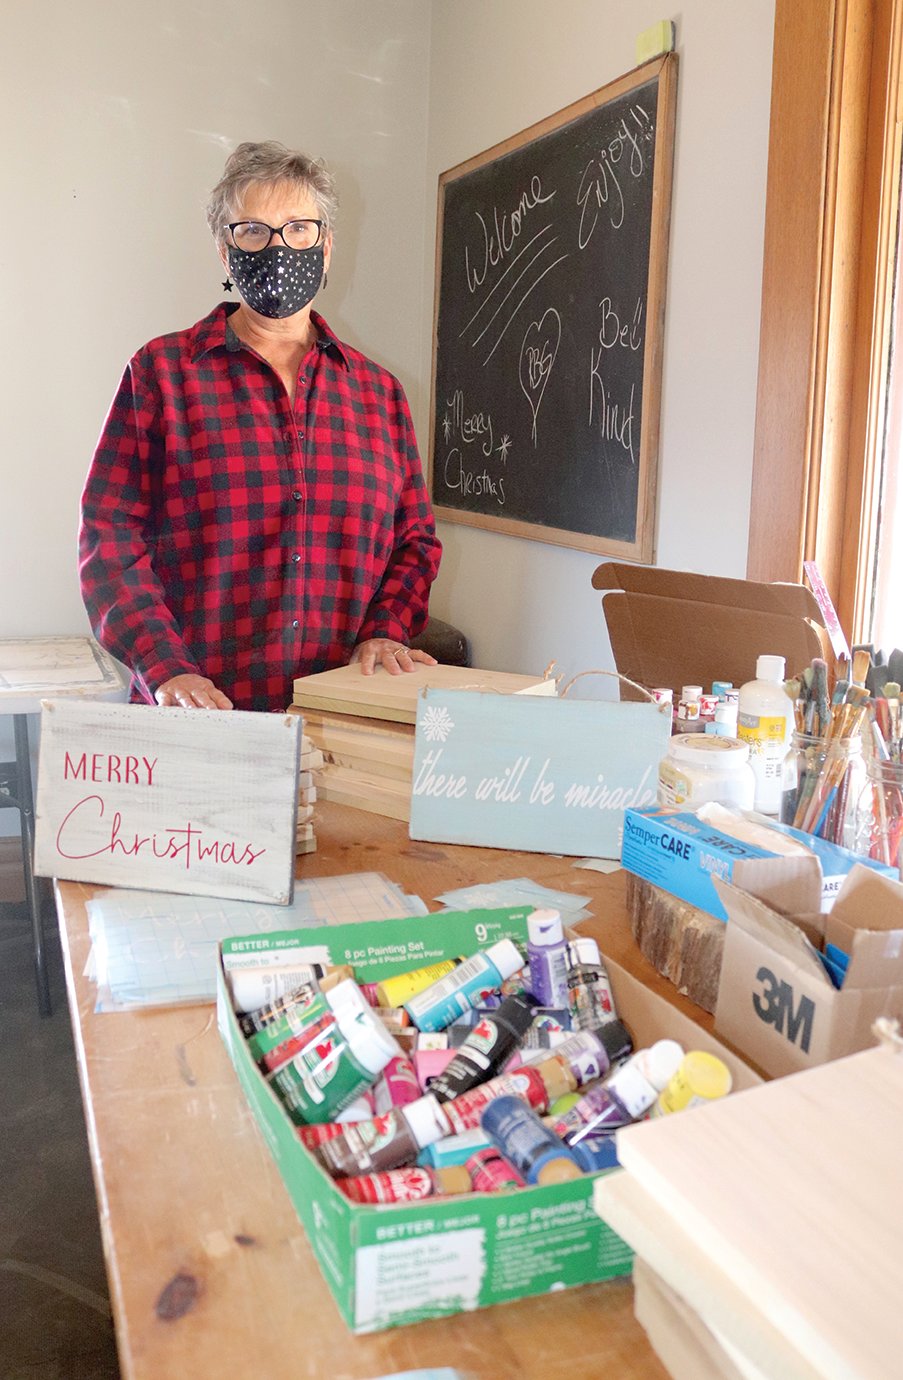 Terri Trinkle, class instructor at Reclaimed by Grace, shows off a bit of her classroom Friday during a holiday open house event for businesses downtown.